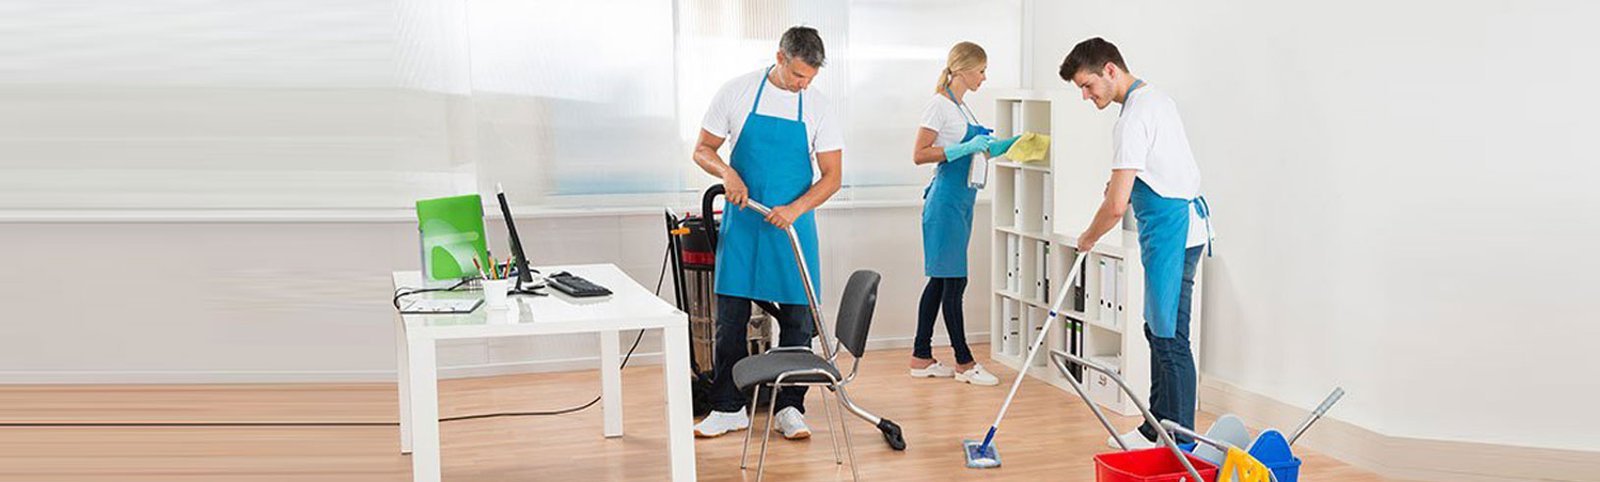 Commercial Cleaning Service Providers